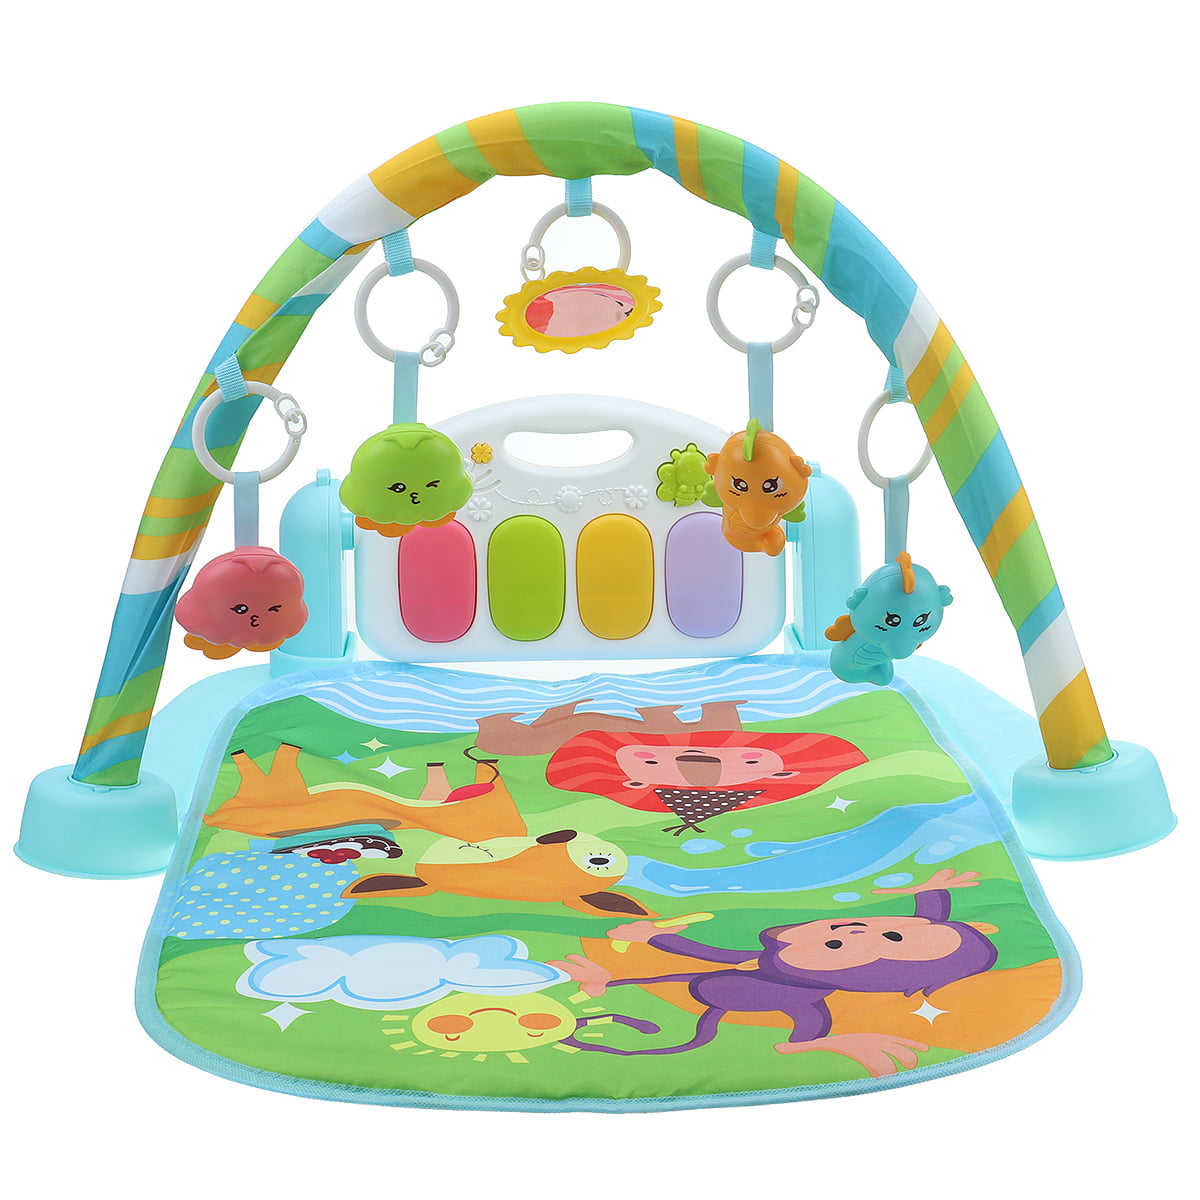 3 In 1 Play Mat Al Piano, Children’s Play Rugs